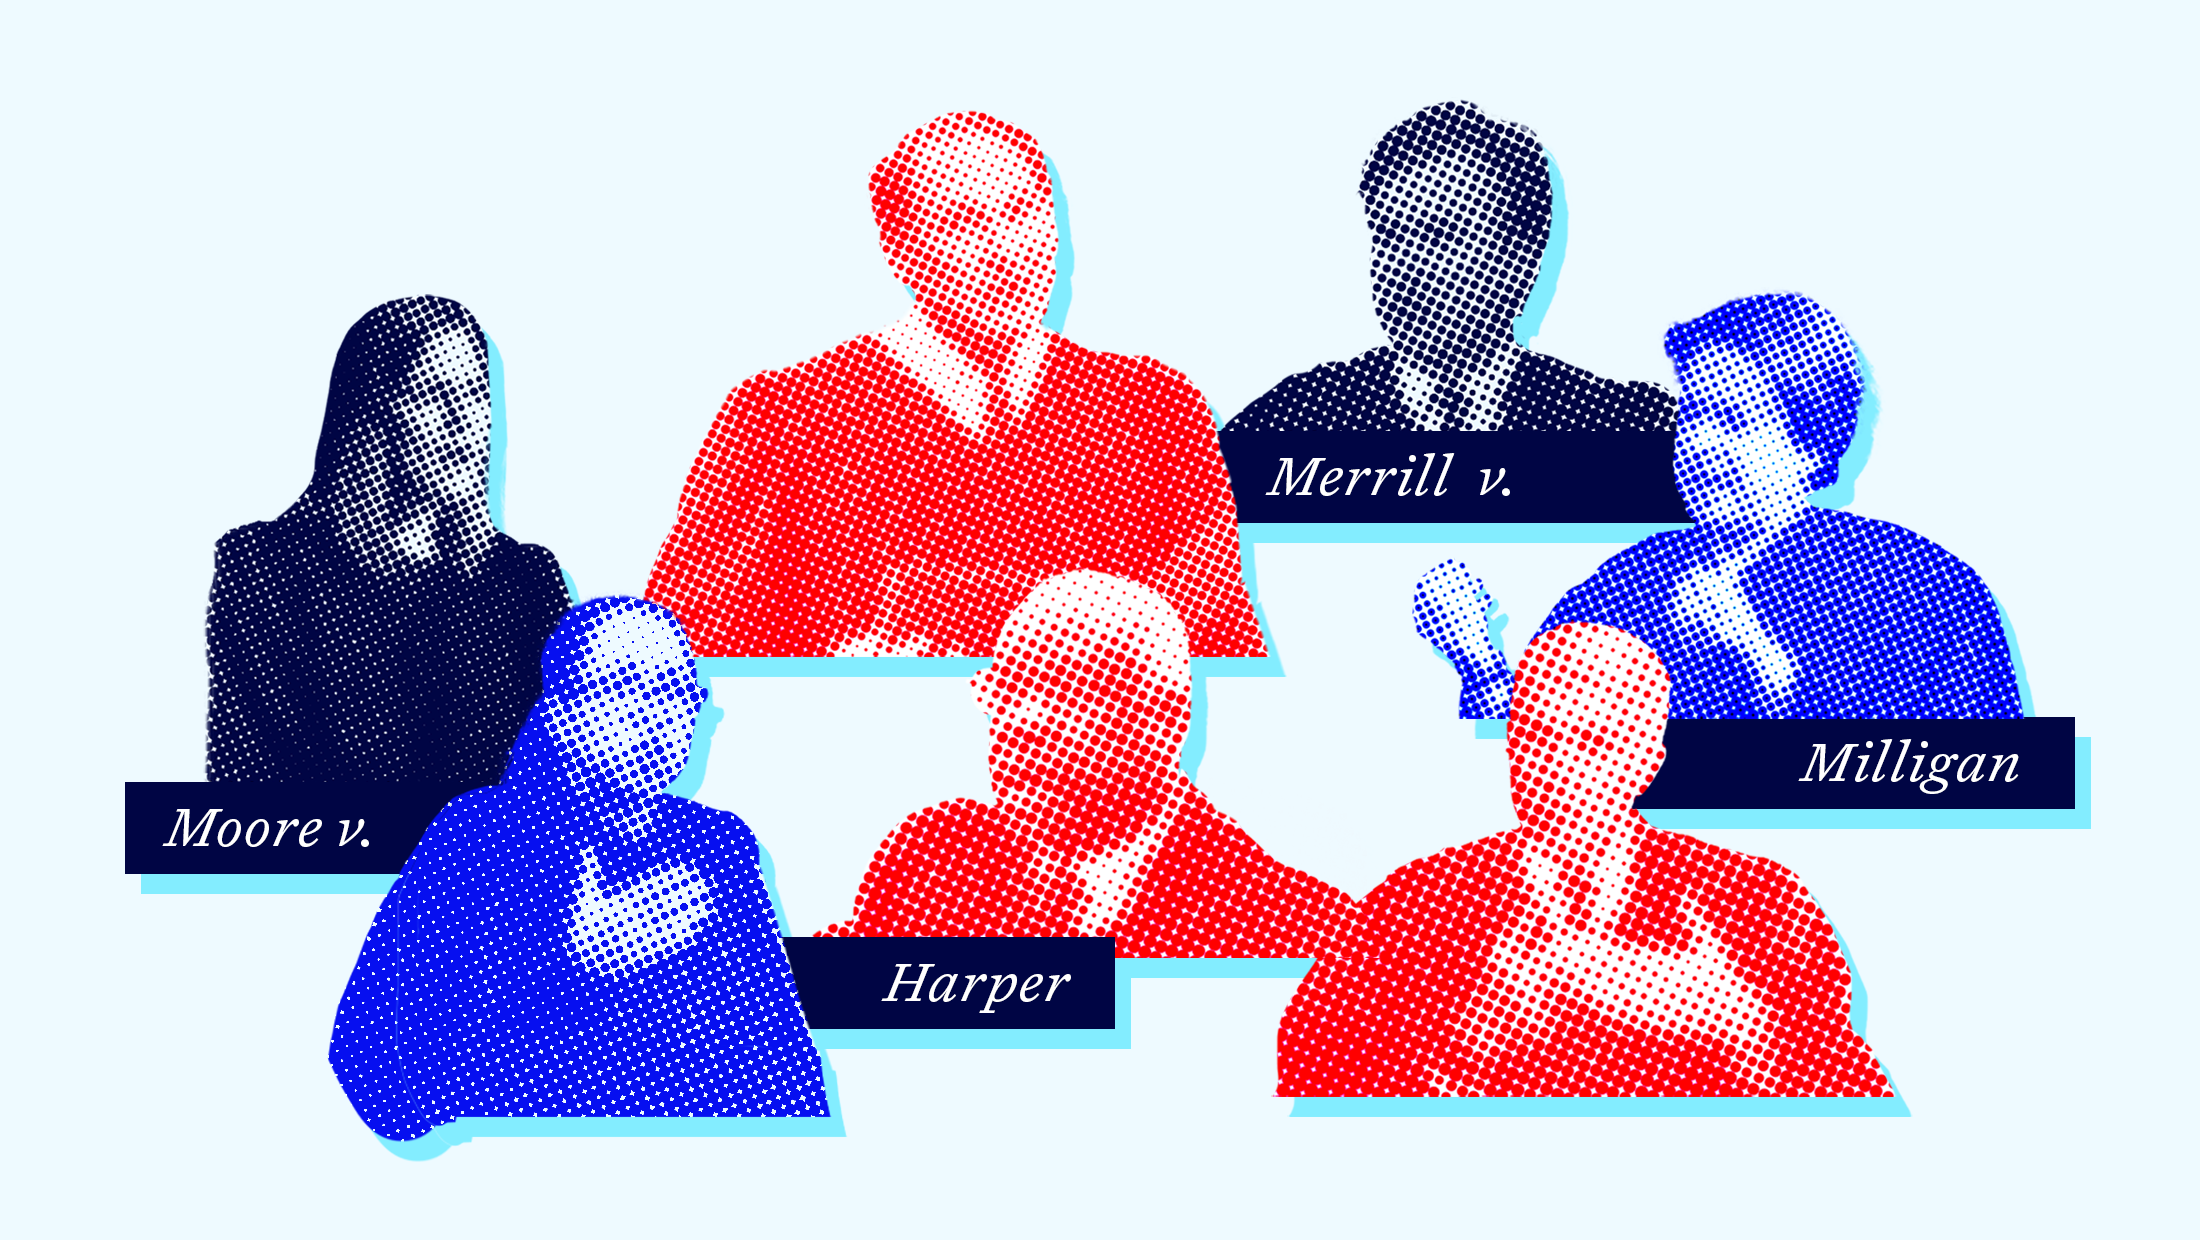 Light blue/white background with textured images of U.S. Supreme Court justices from left to right: Amy Coney Barrett, Ketanji Brown Jackson, Samuel Alito, Clarence Thomas, Brett Kavanaugh, Neil Gorsuch and Elena Kagan. Also written is the name of two Supreme Court cases: Moore v. Harper and Merrill v. Milligan.